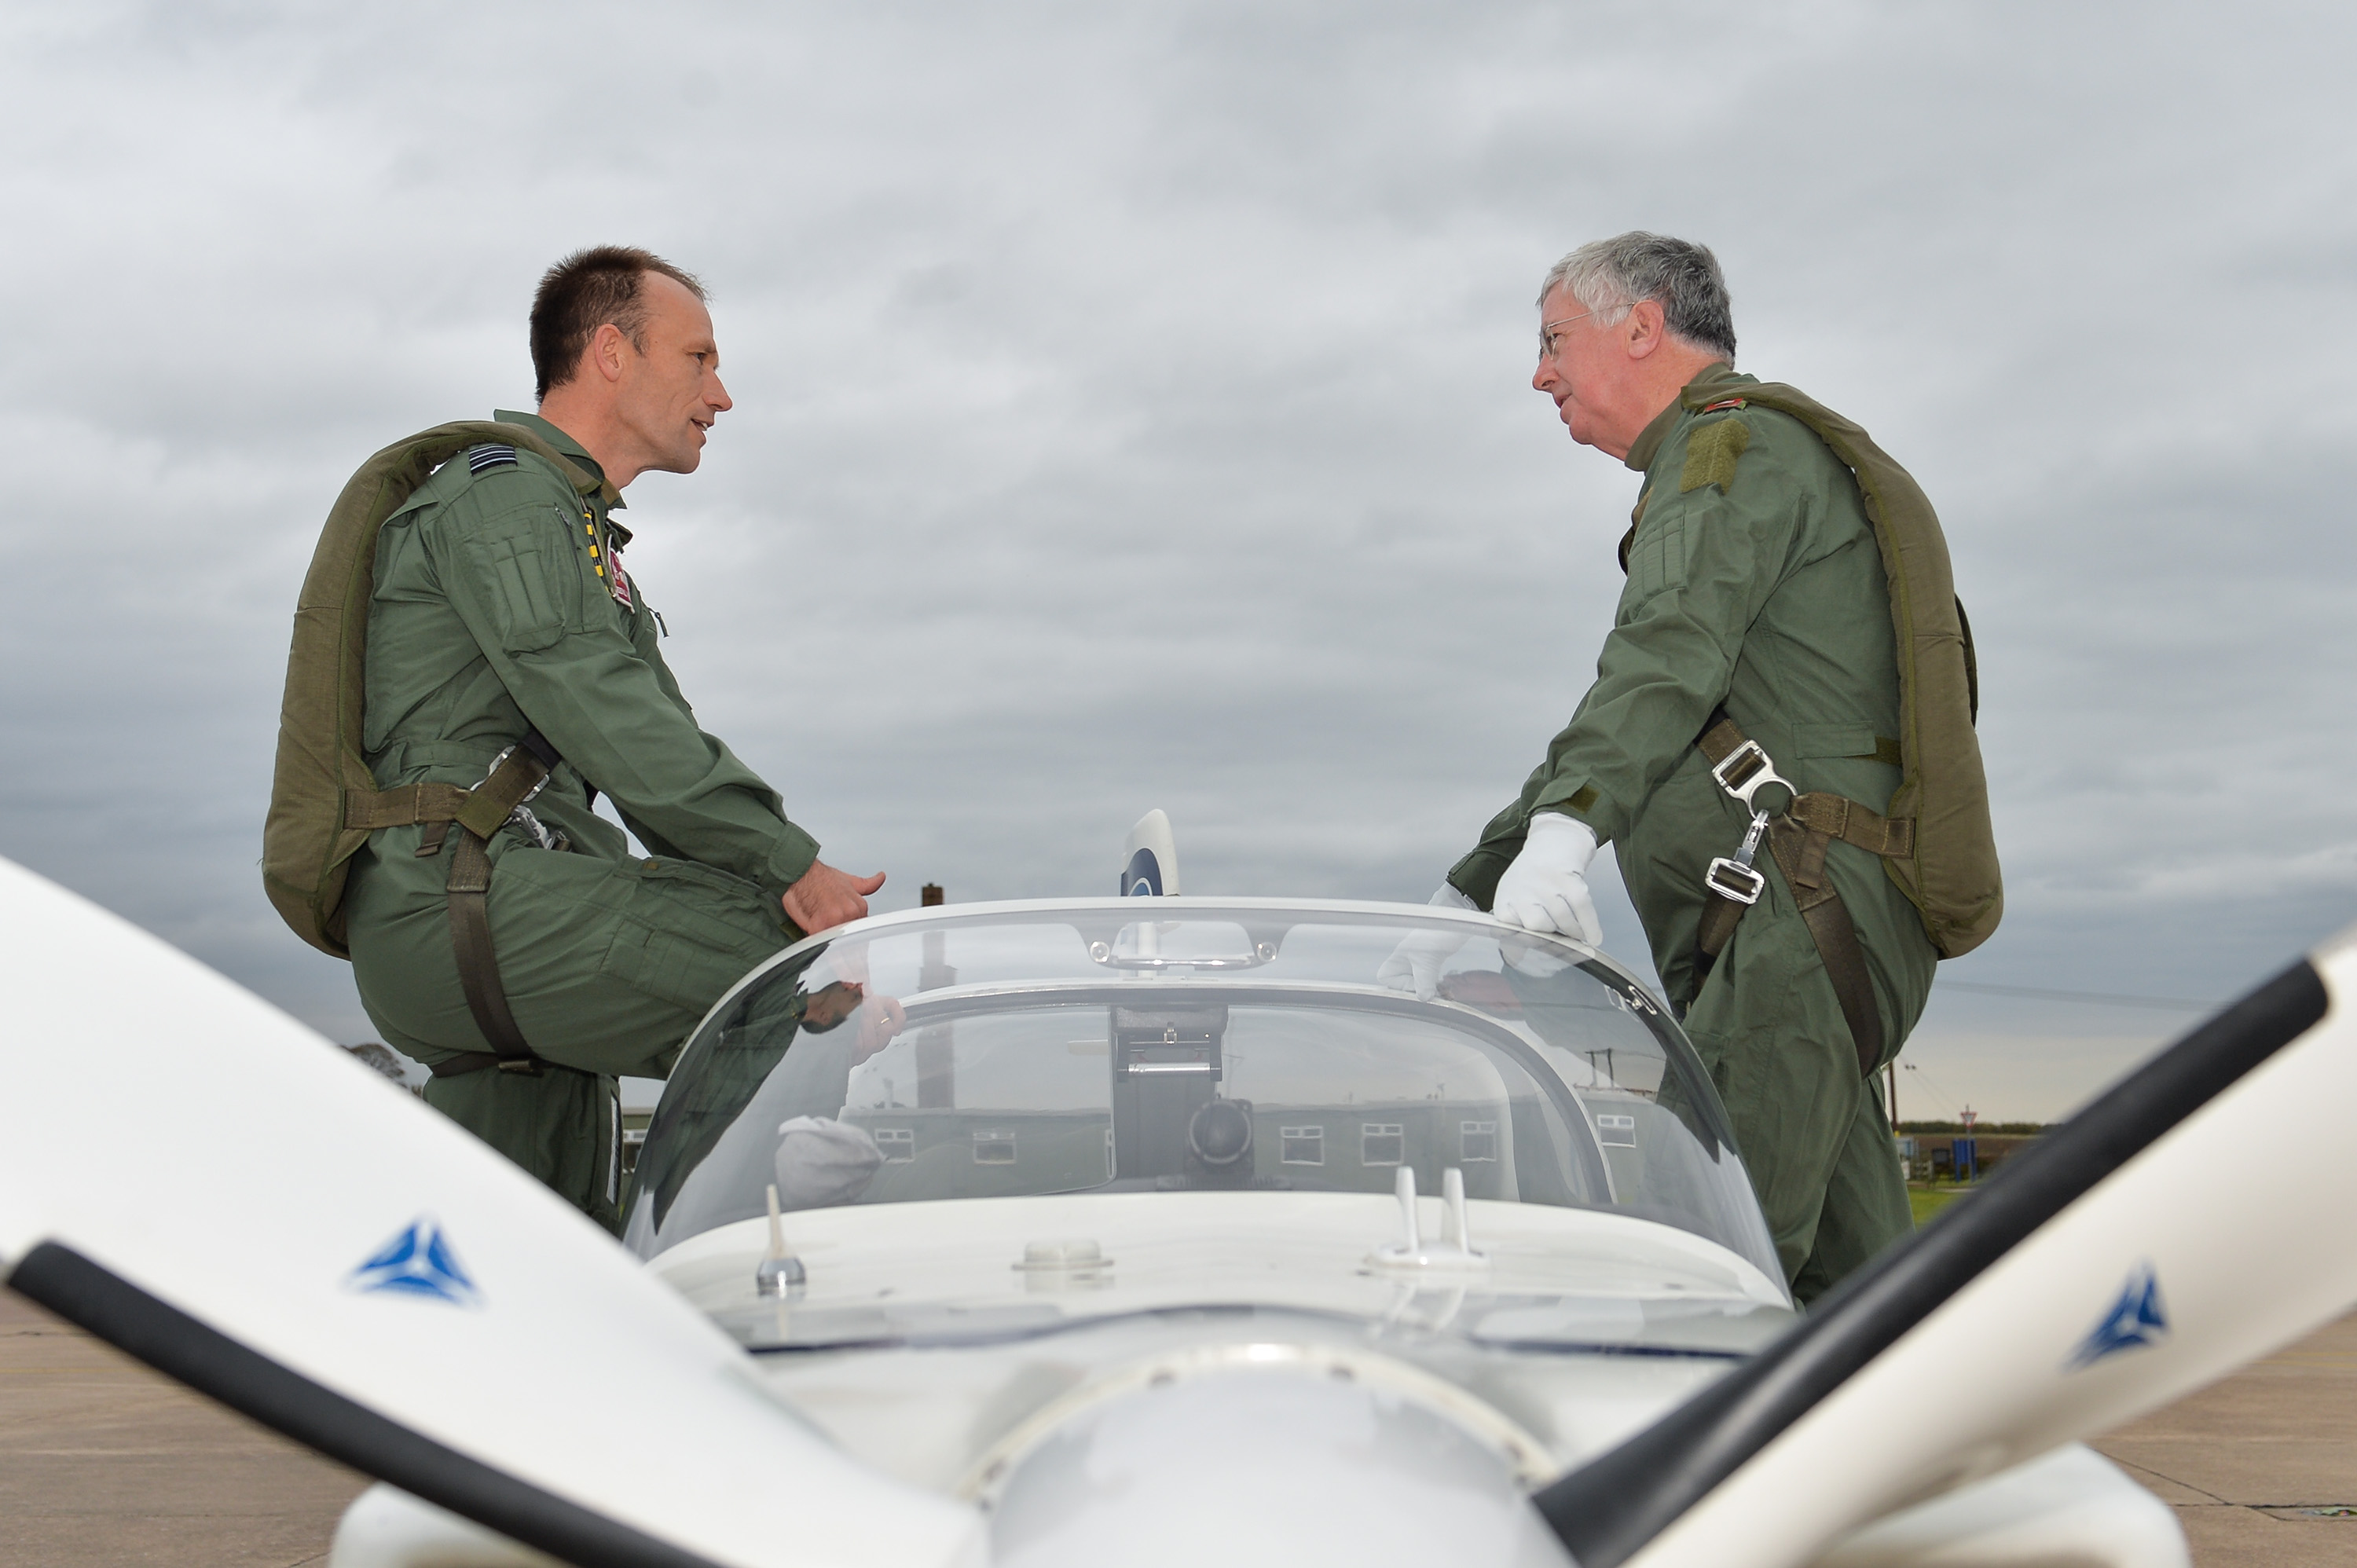 Visit to RAF Cranwell by the Secretary of State for Defence the Right Honourable Michael Fallon MP. He is seen here preparing for a flight in a Grob Tutor training aircraft with 3 Flying Training School.